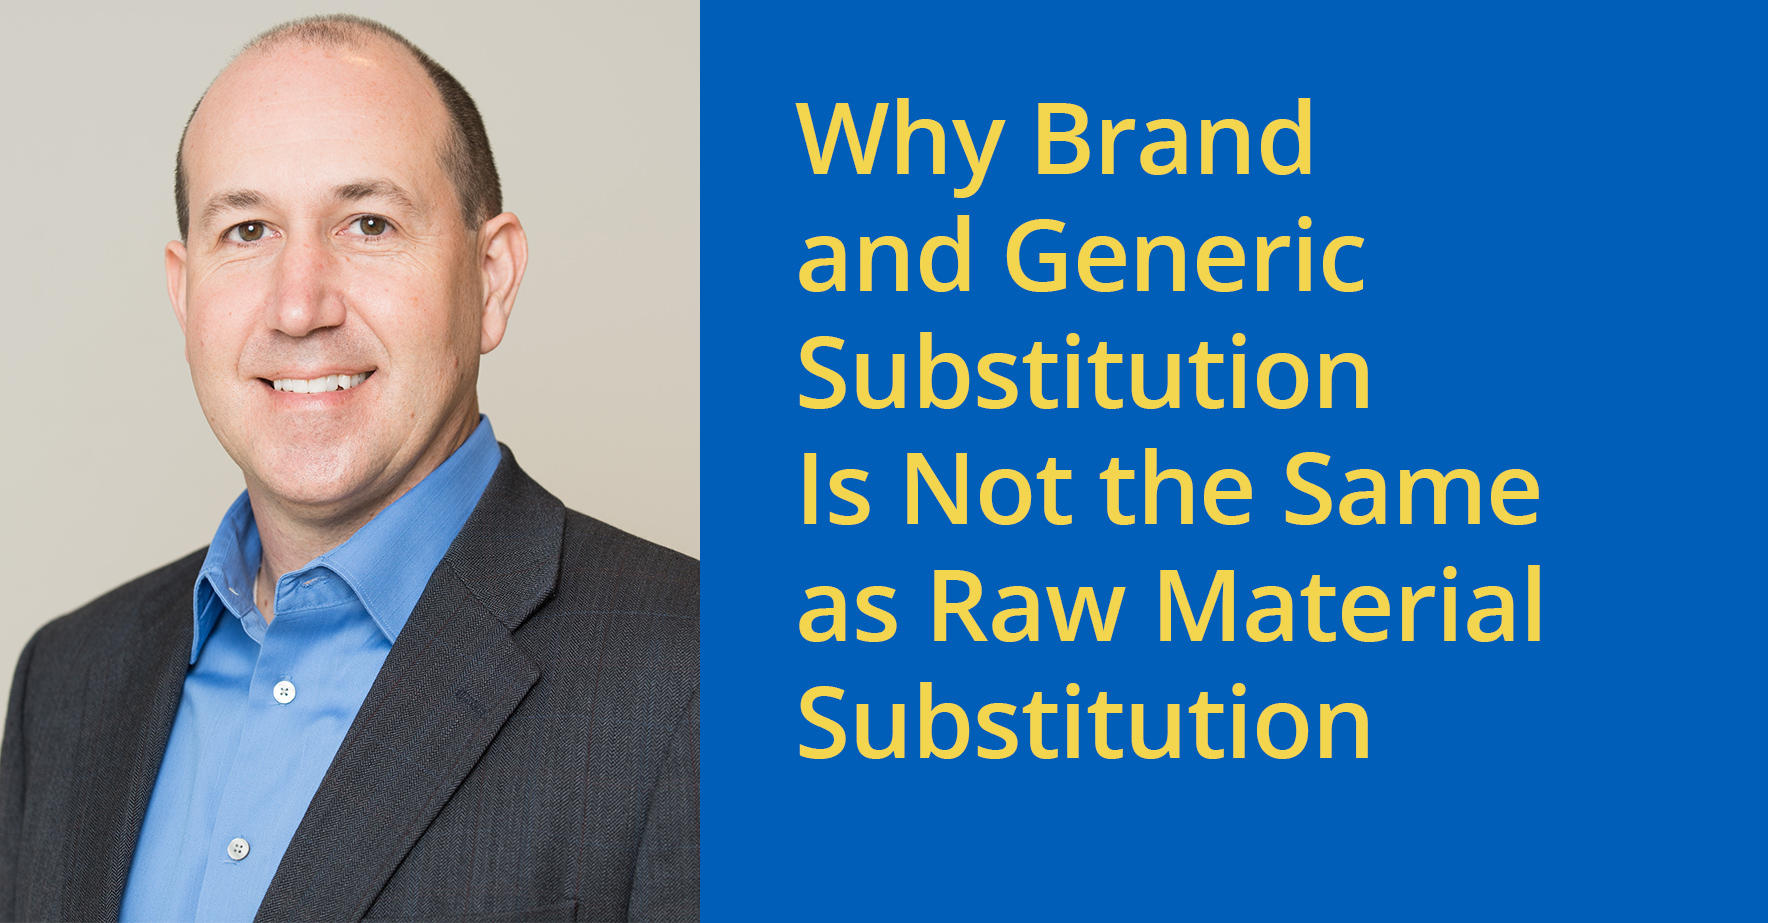 Why_Brand_and_Generic_Substitution_Is_Not_the_Same_as_Raw_Material_Substitution.jpg